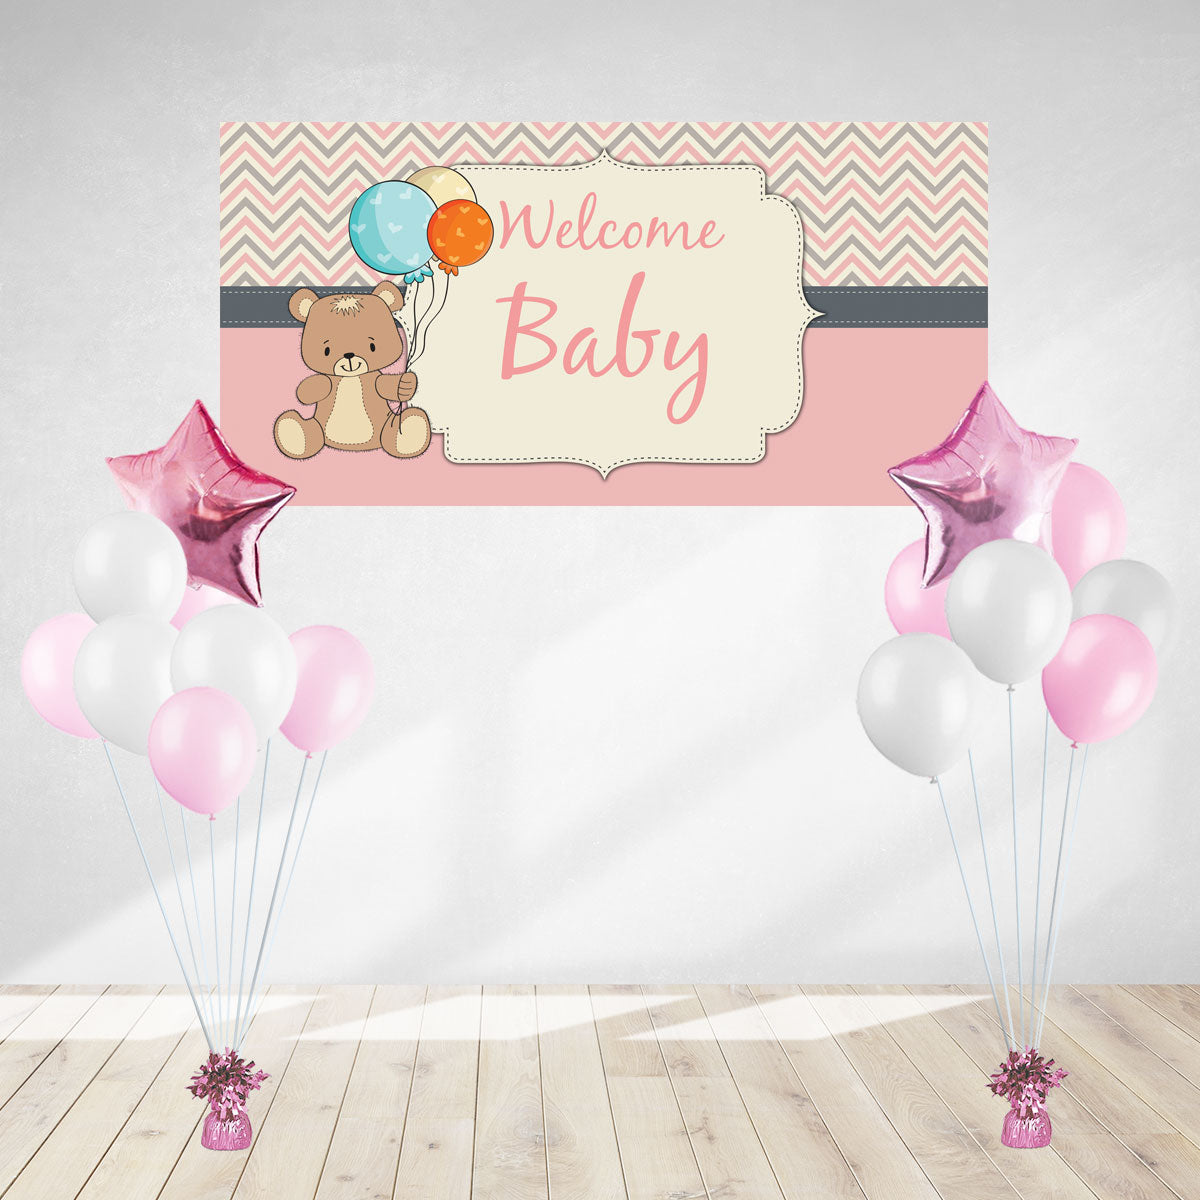 Pink banner and balloons set for decorating the party to celebrate the arrival of the sweet baby girl.